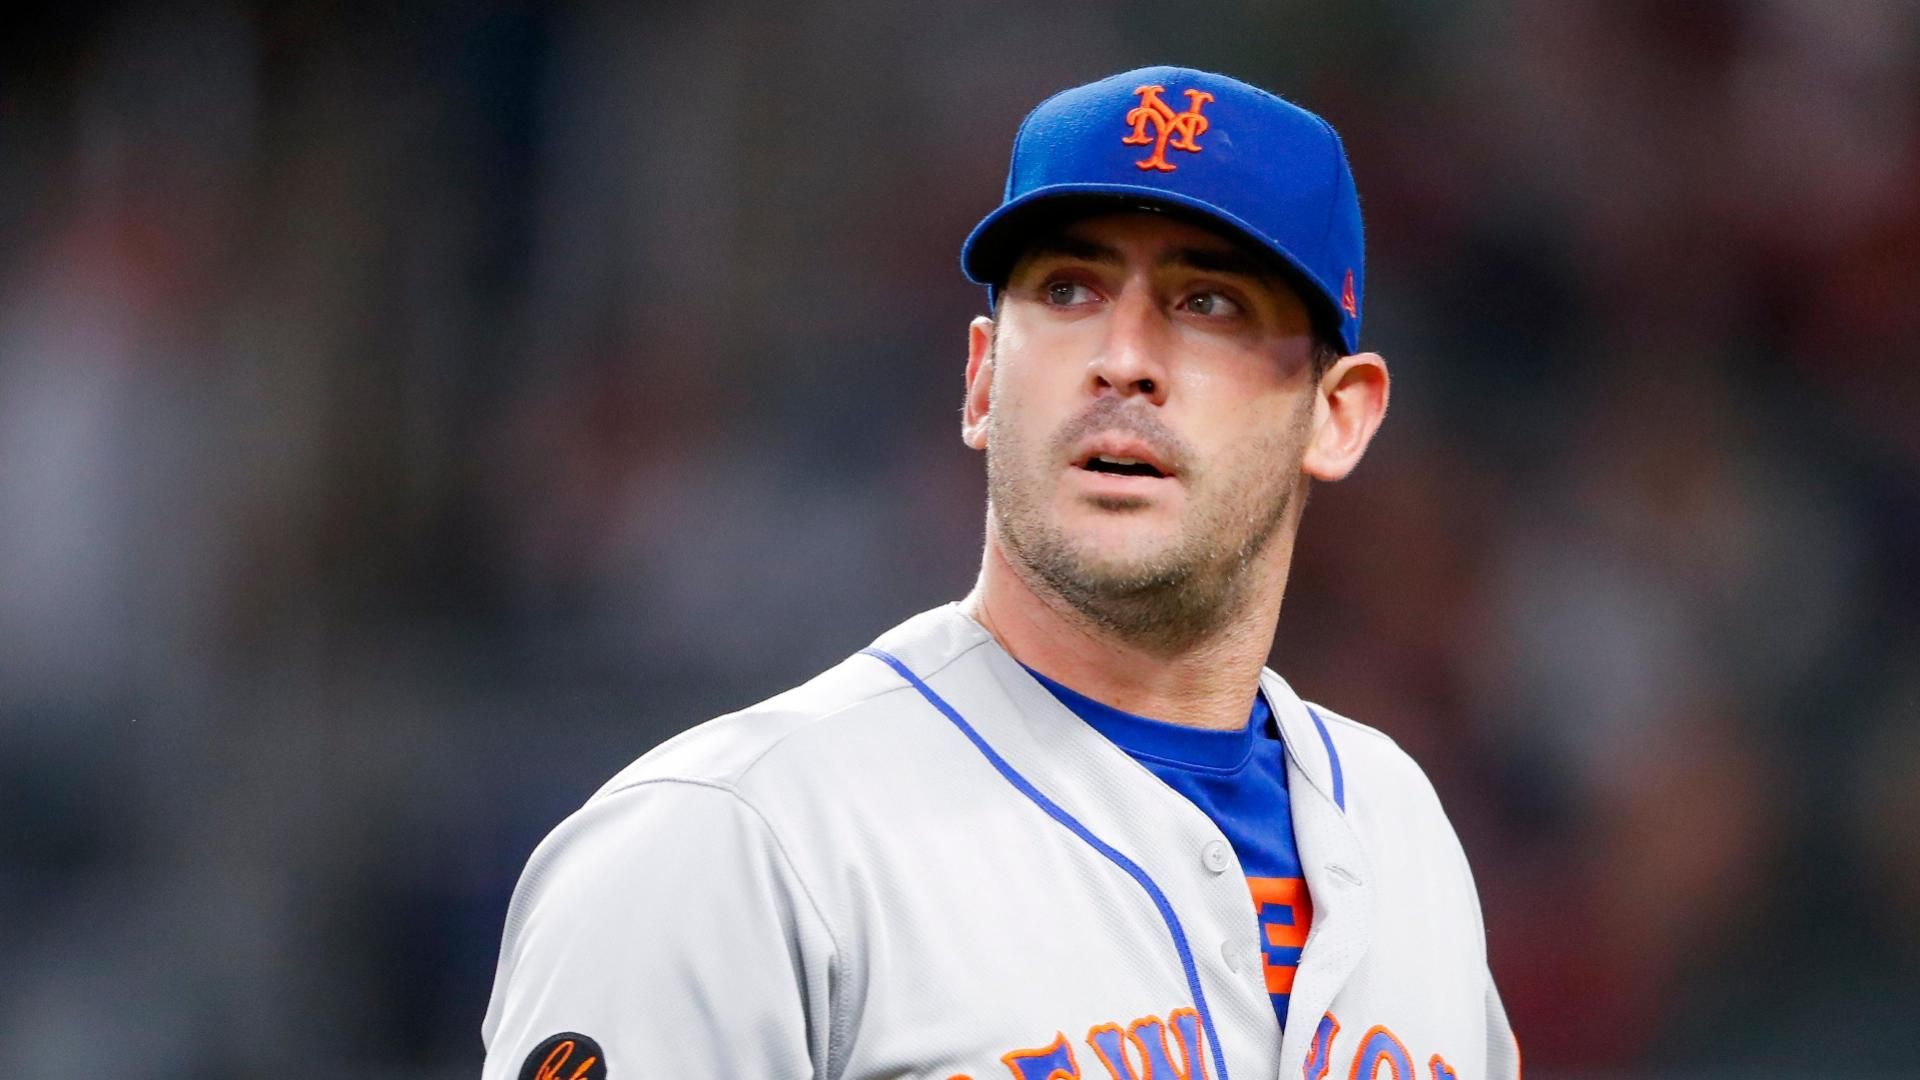 Harvey roughed up in loss to Braves